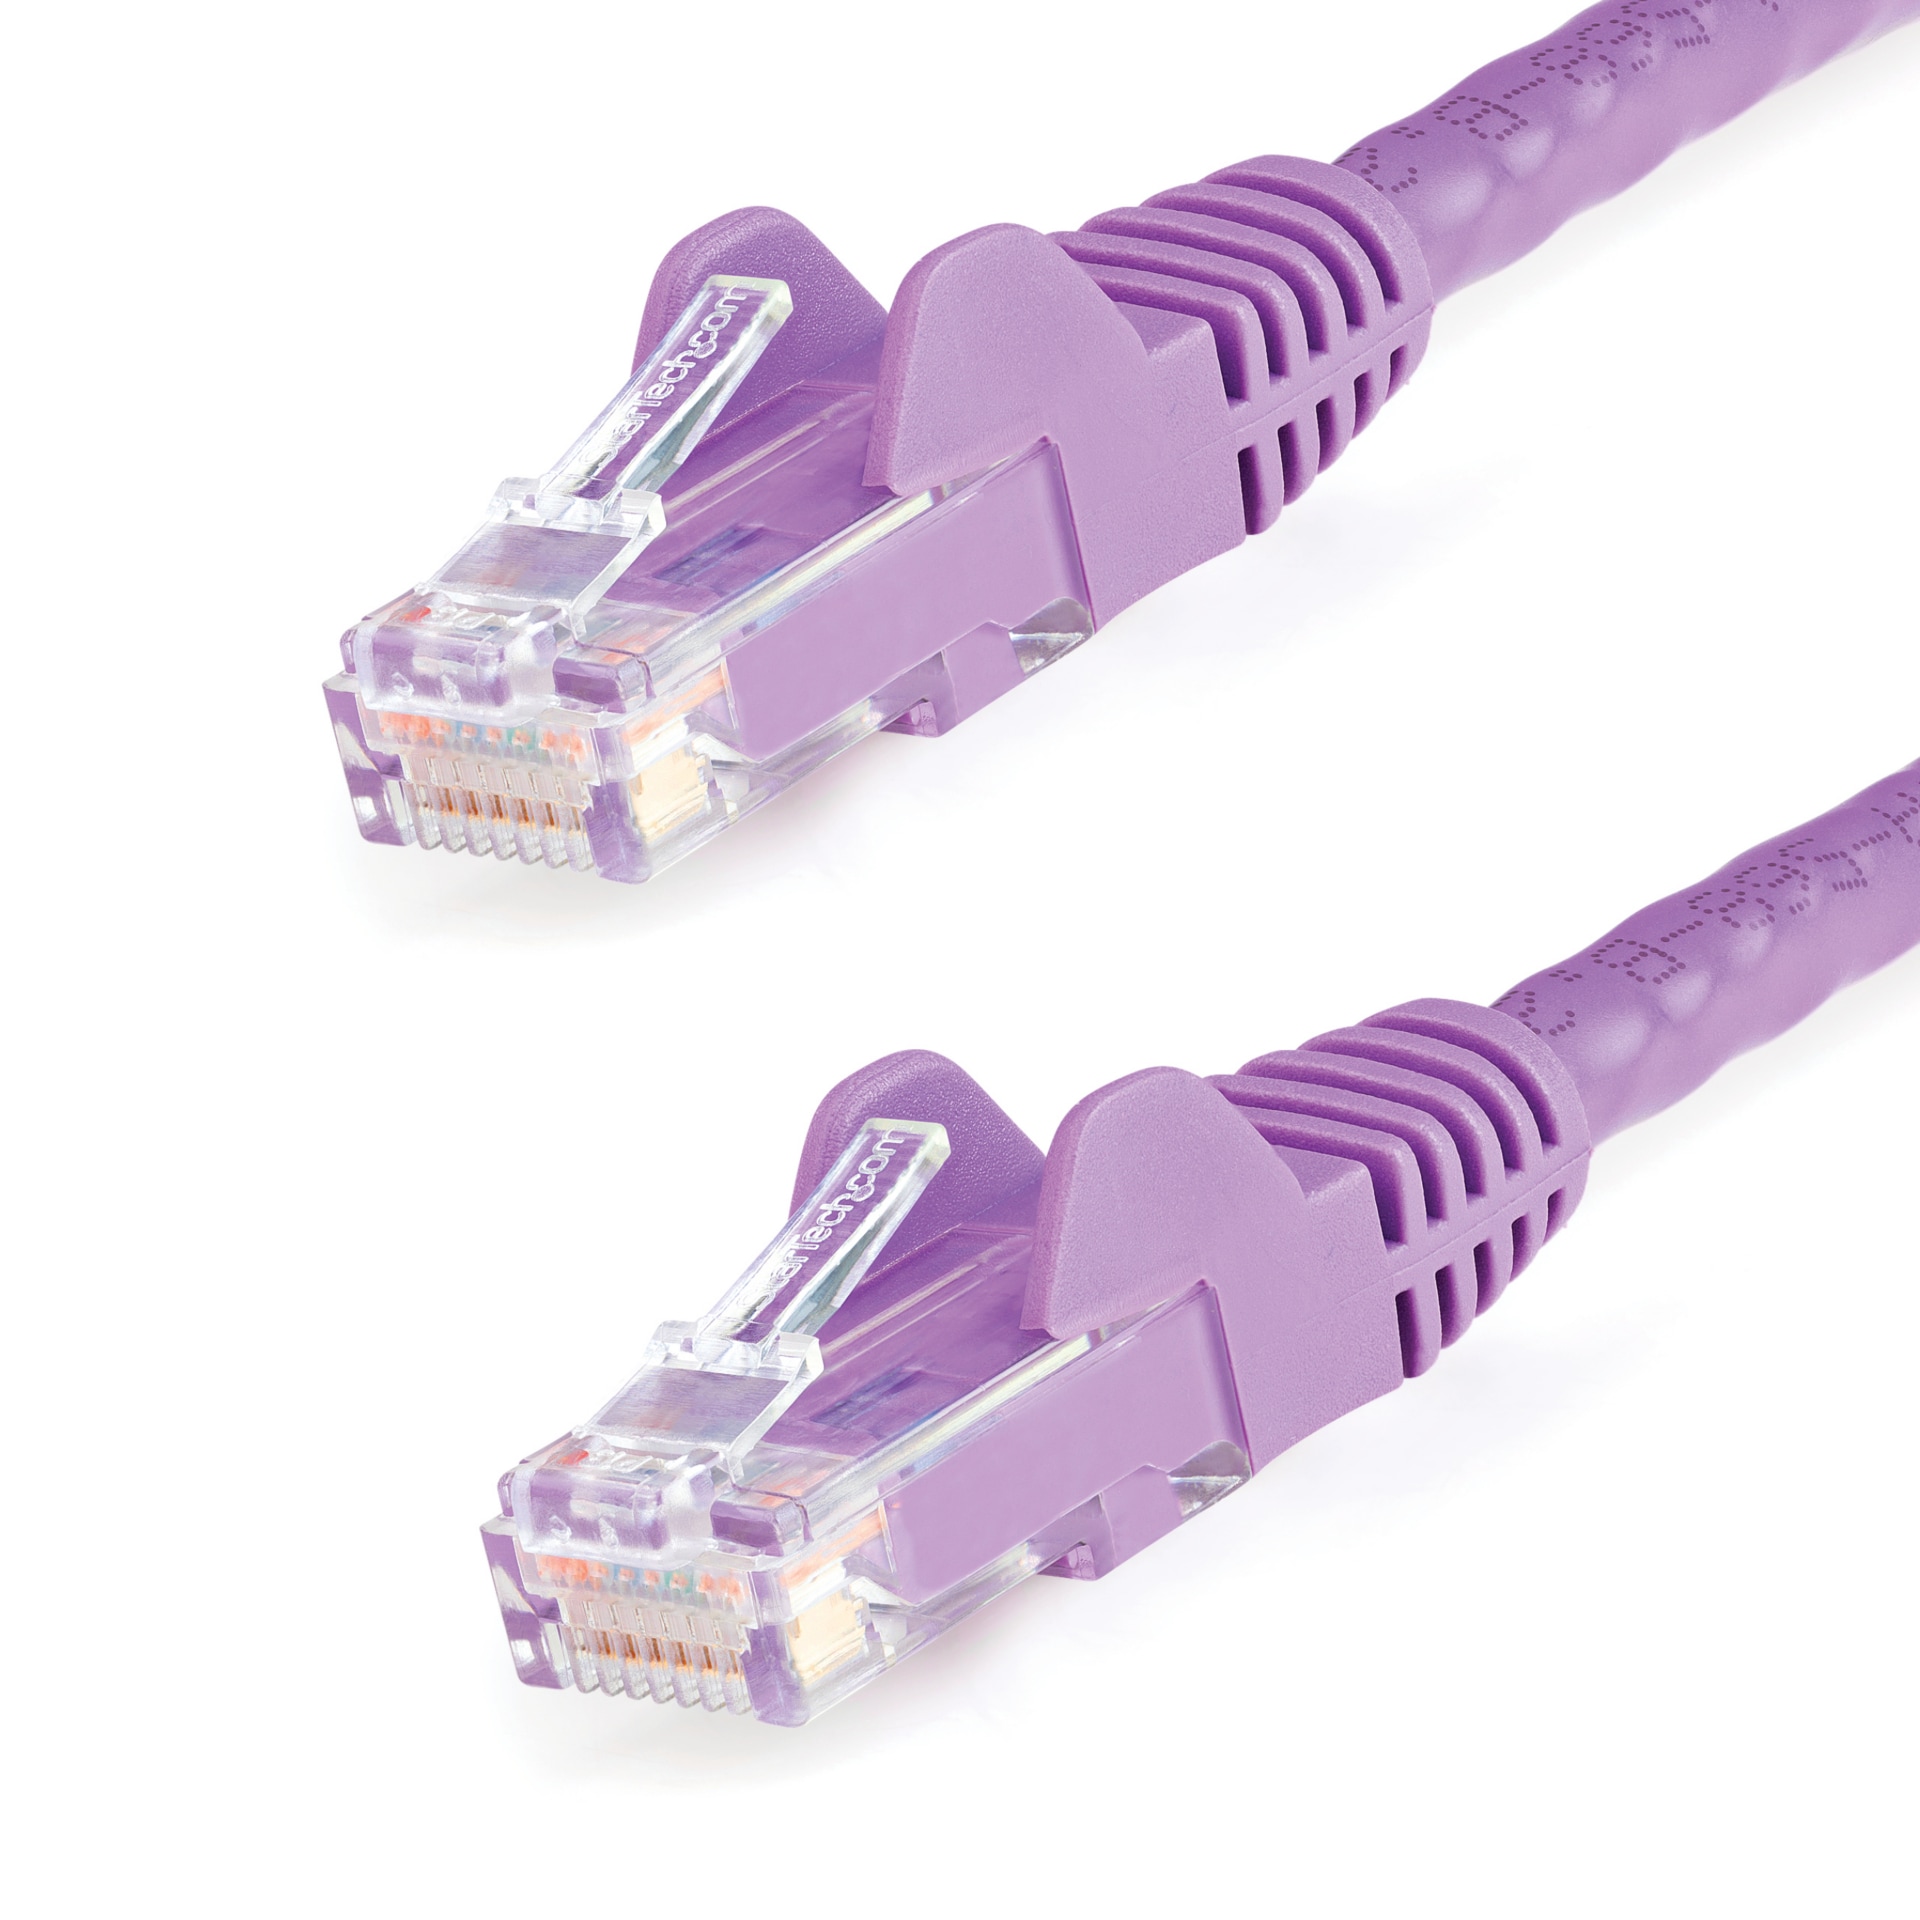 StarTech.com CAT6 Ethernet Cable 3' Purple 650MHz PoE Snagless Patch Cord